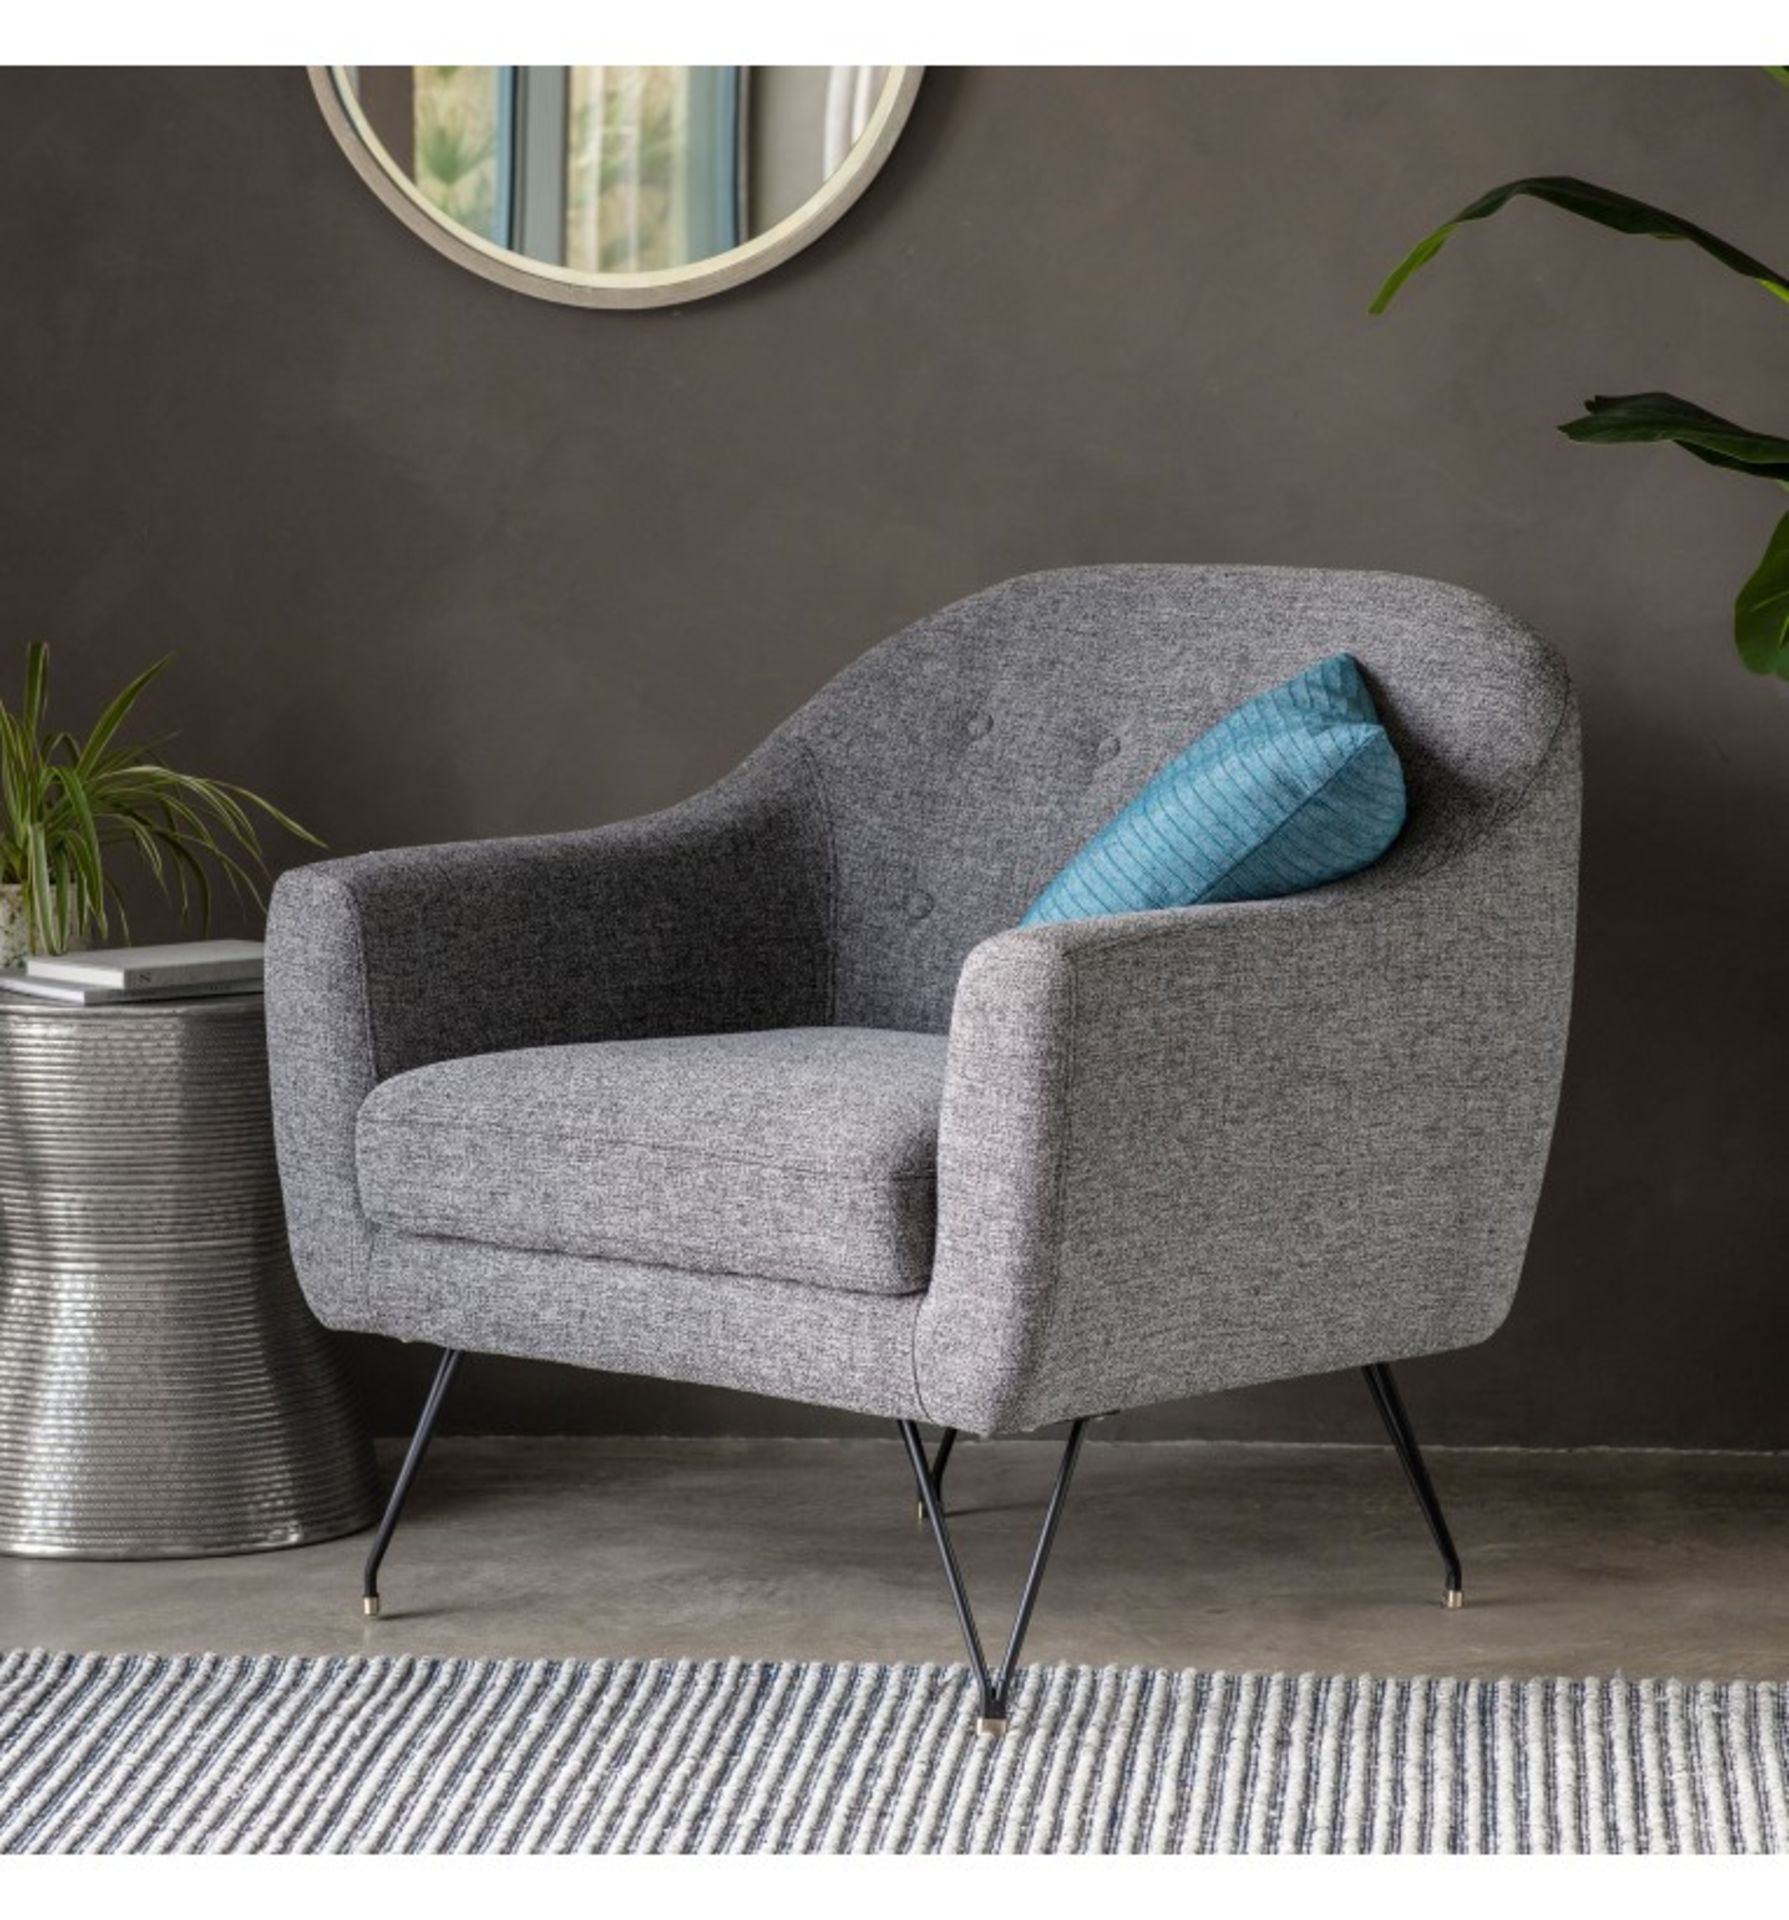 Volda Armchair Space Grey The Volda Armchair In Space Grey Is A Retro-Inspired Chair That Adds A